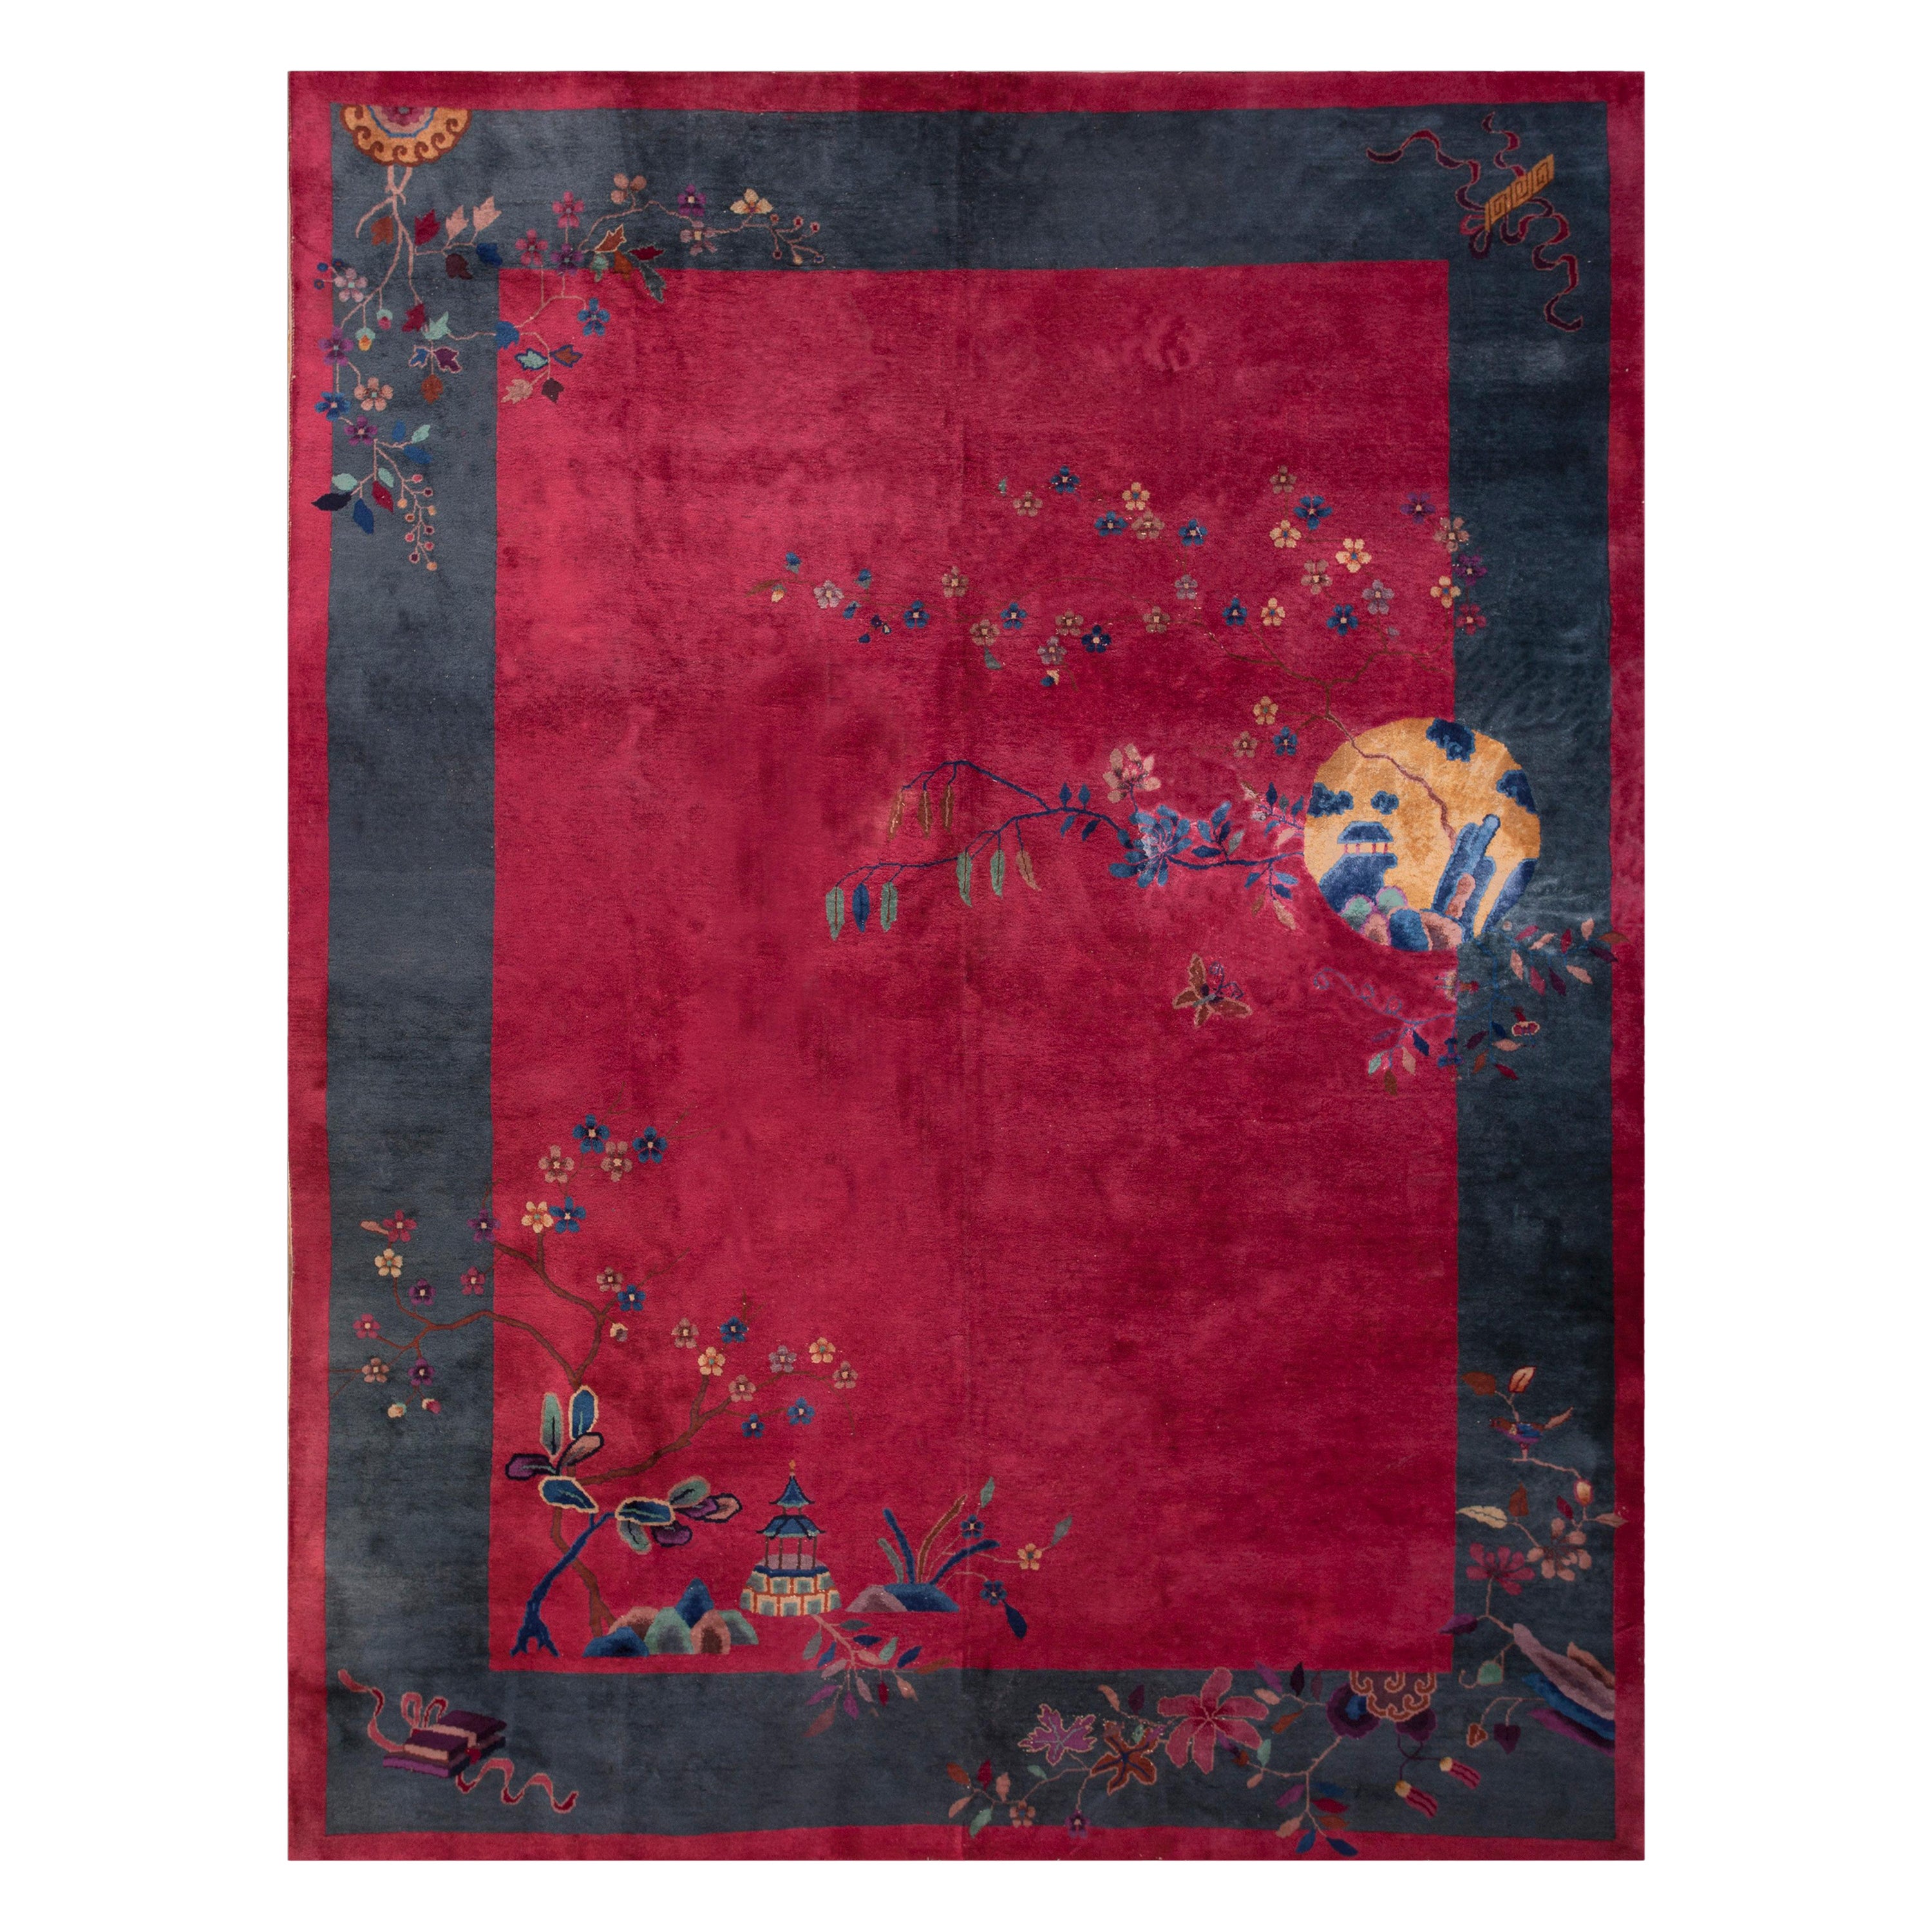 1920s Chinese Art Deco Carpet ( 9'2" x 11'8" - 280 x 355 ) For Sale